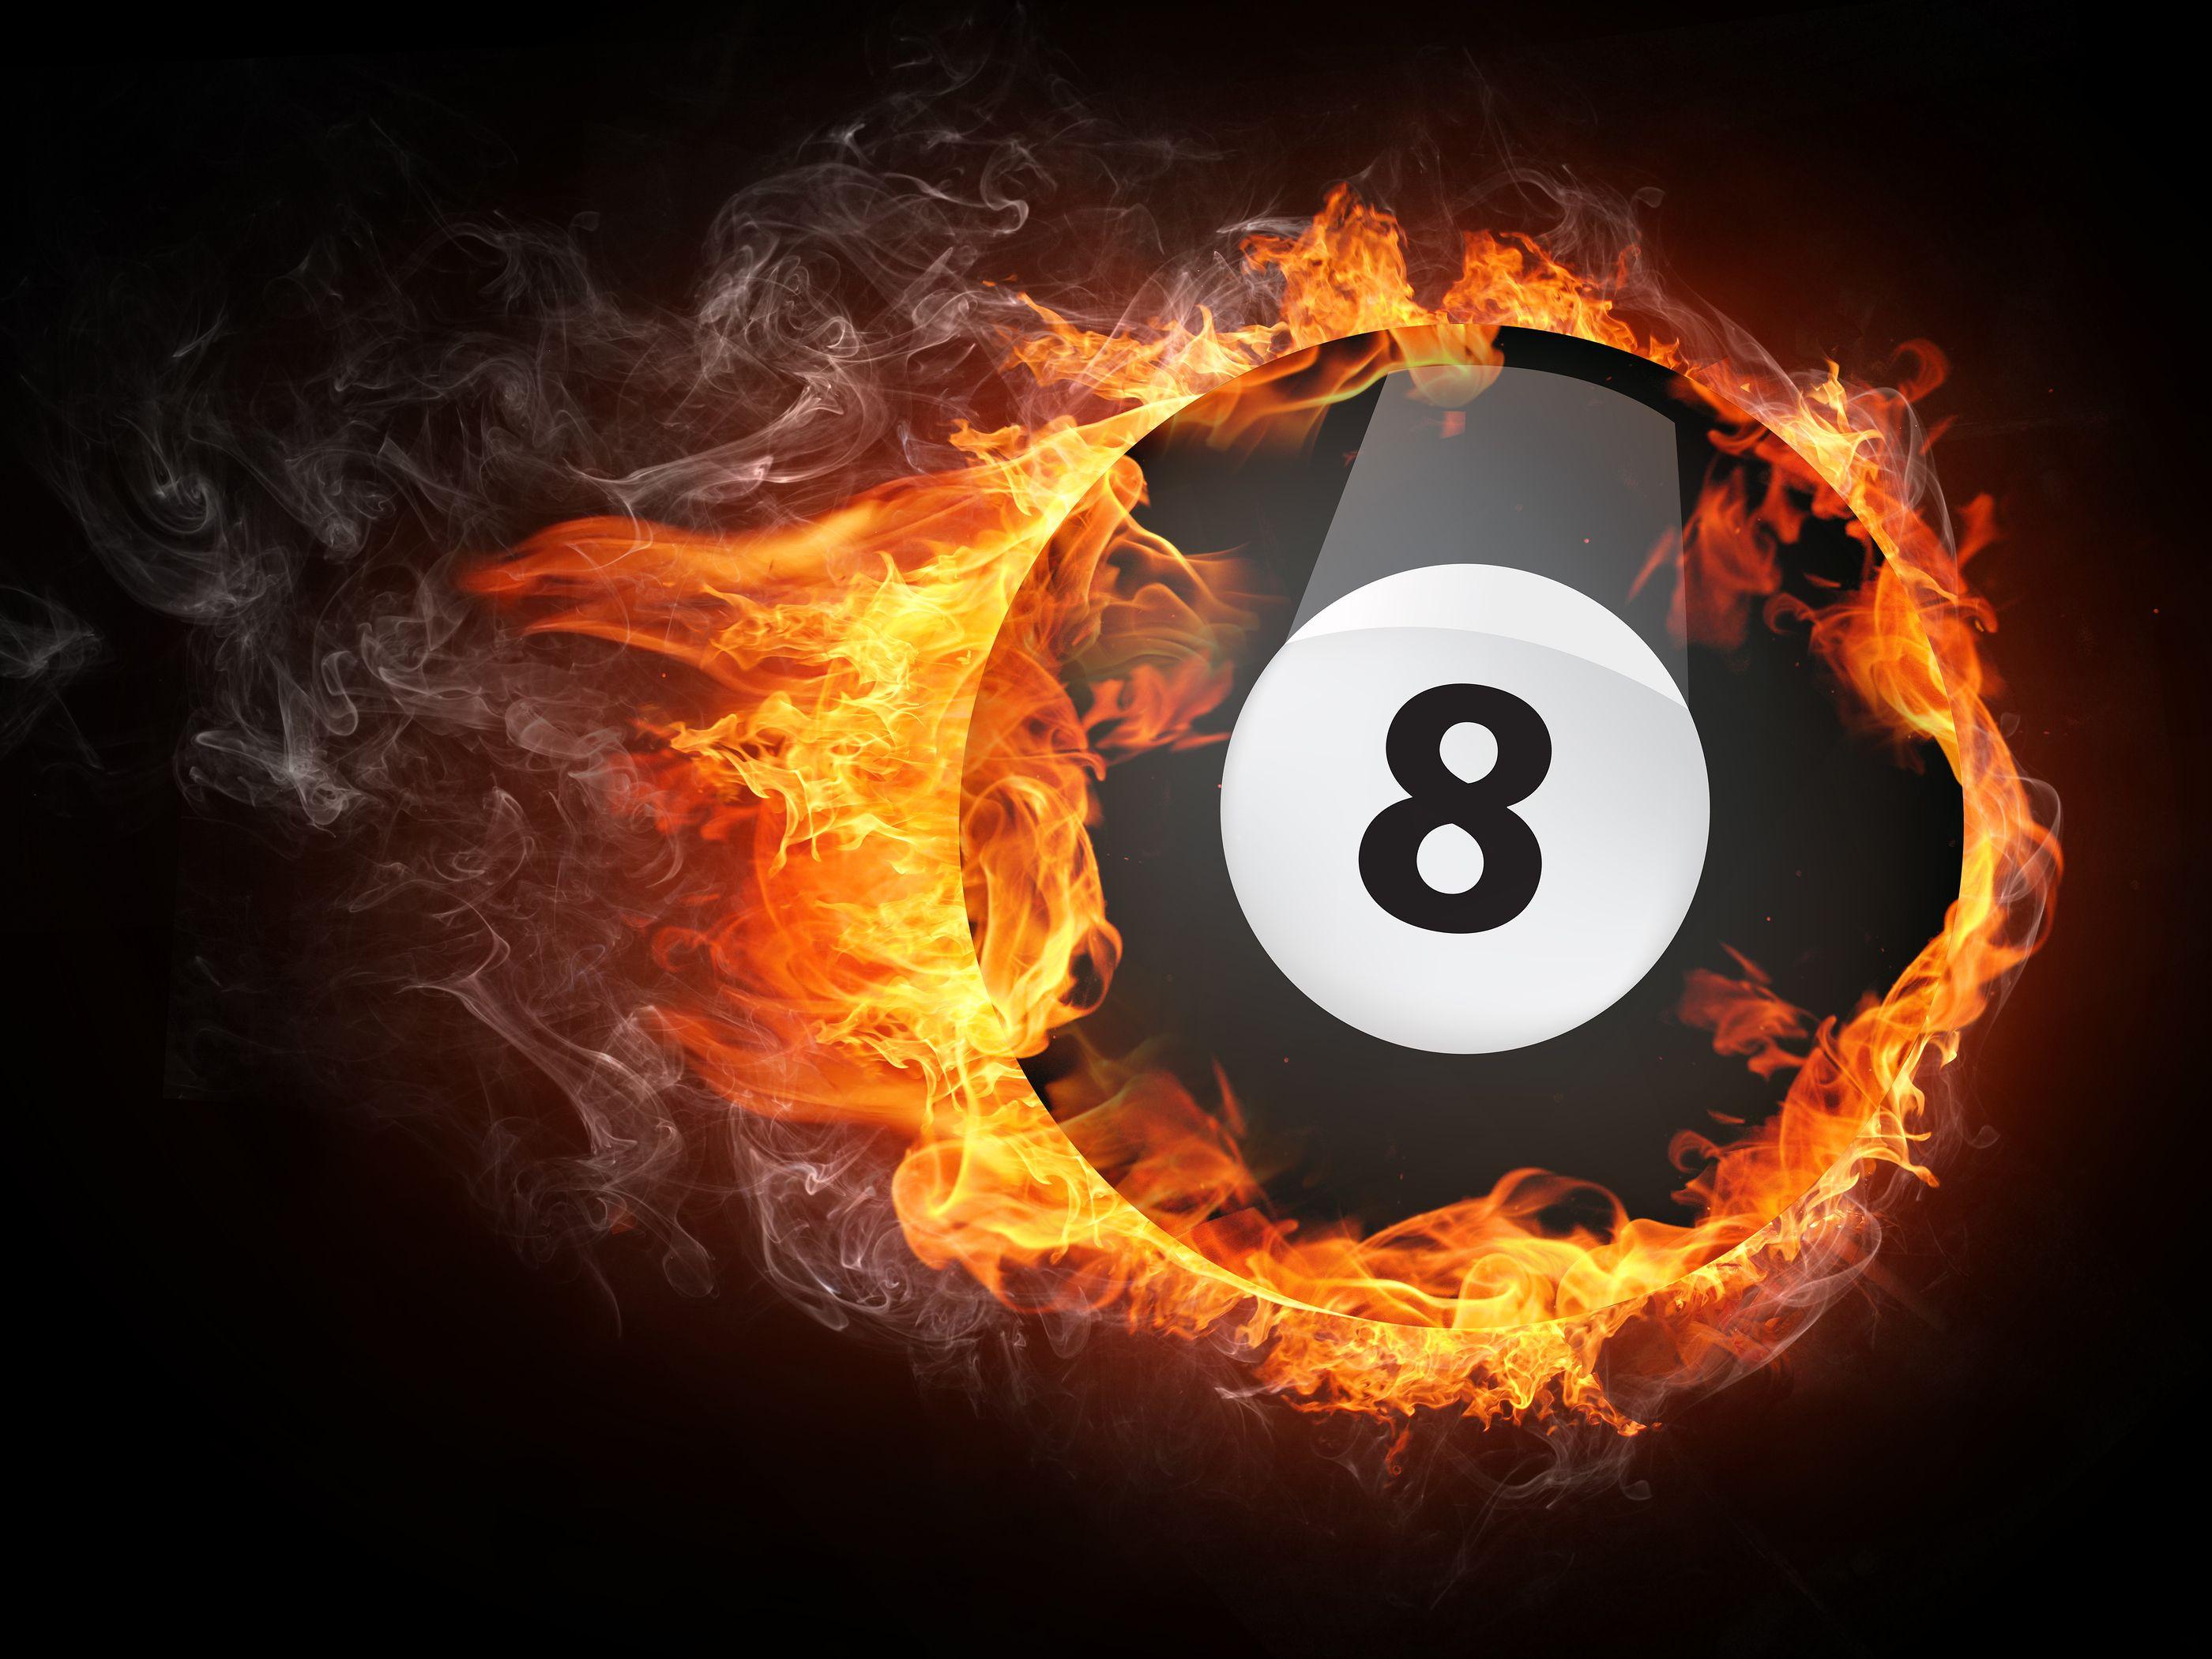 8 ball pool for pc online